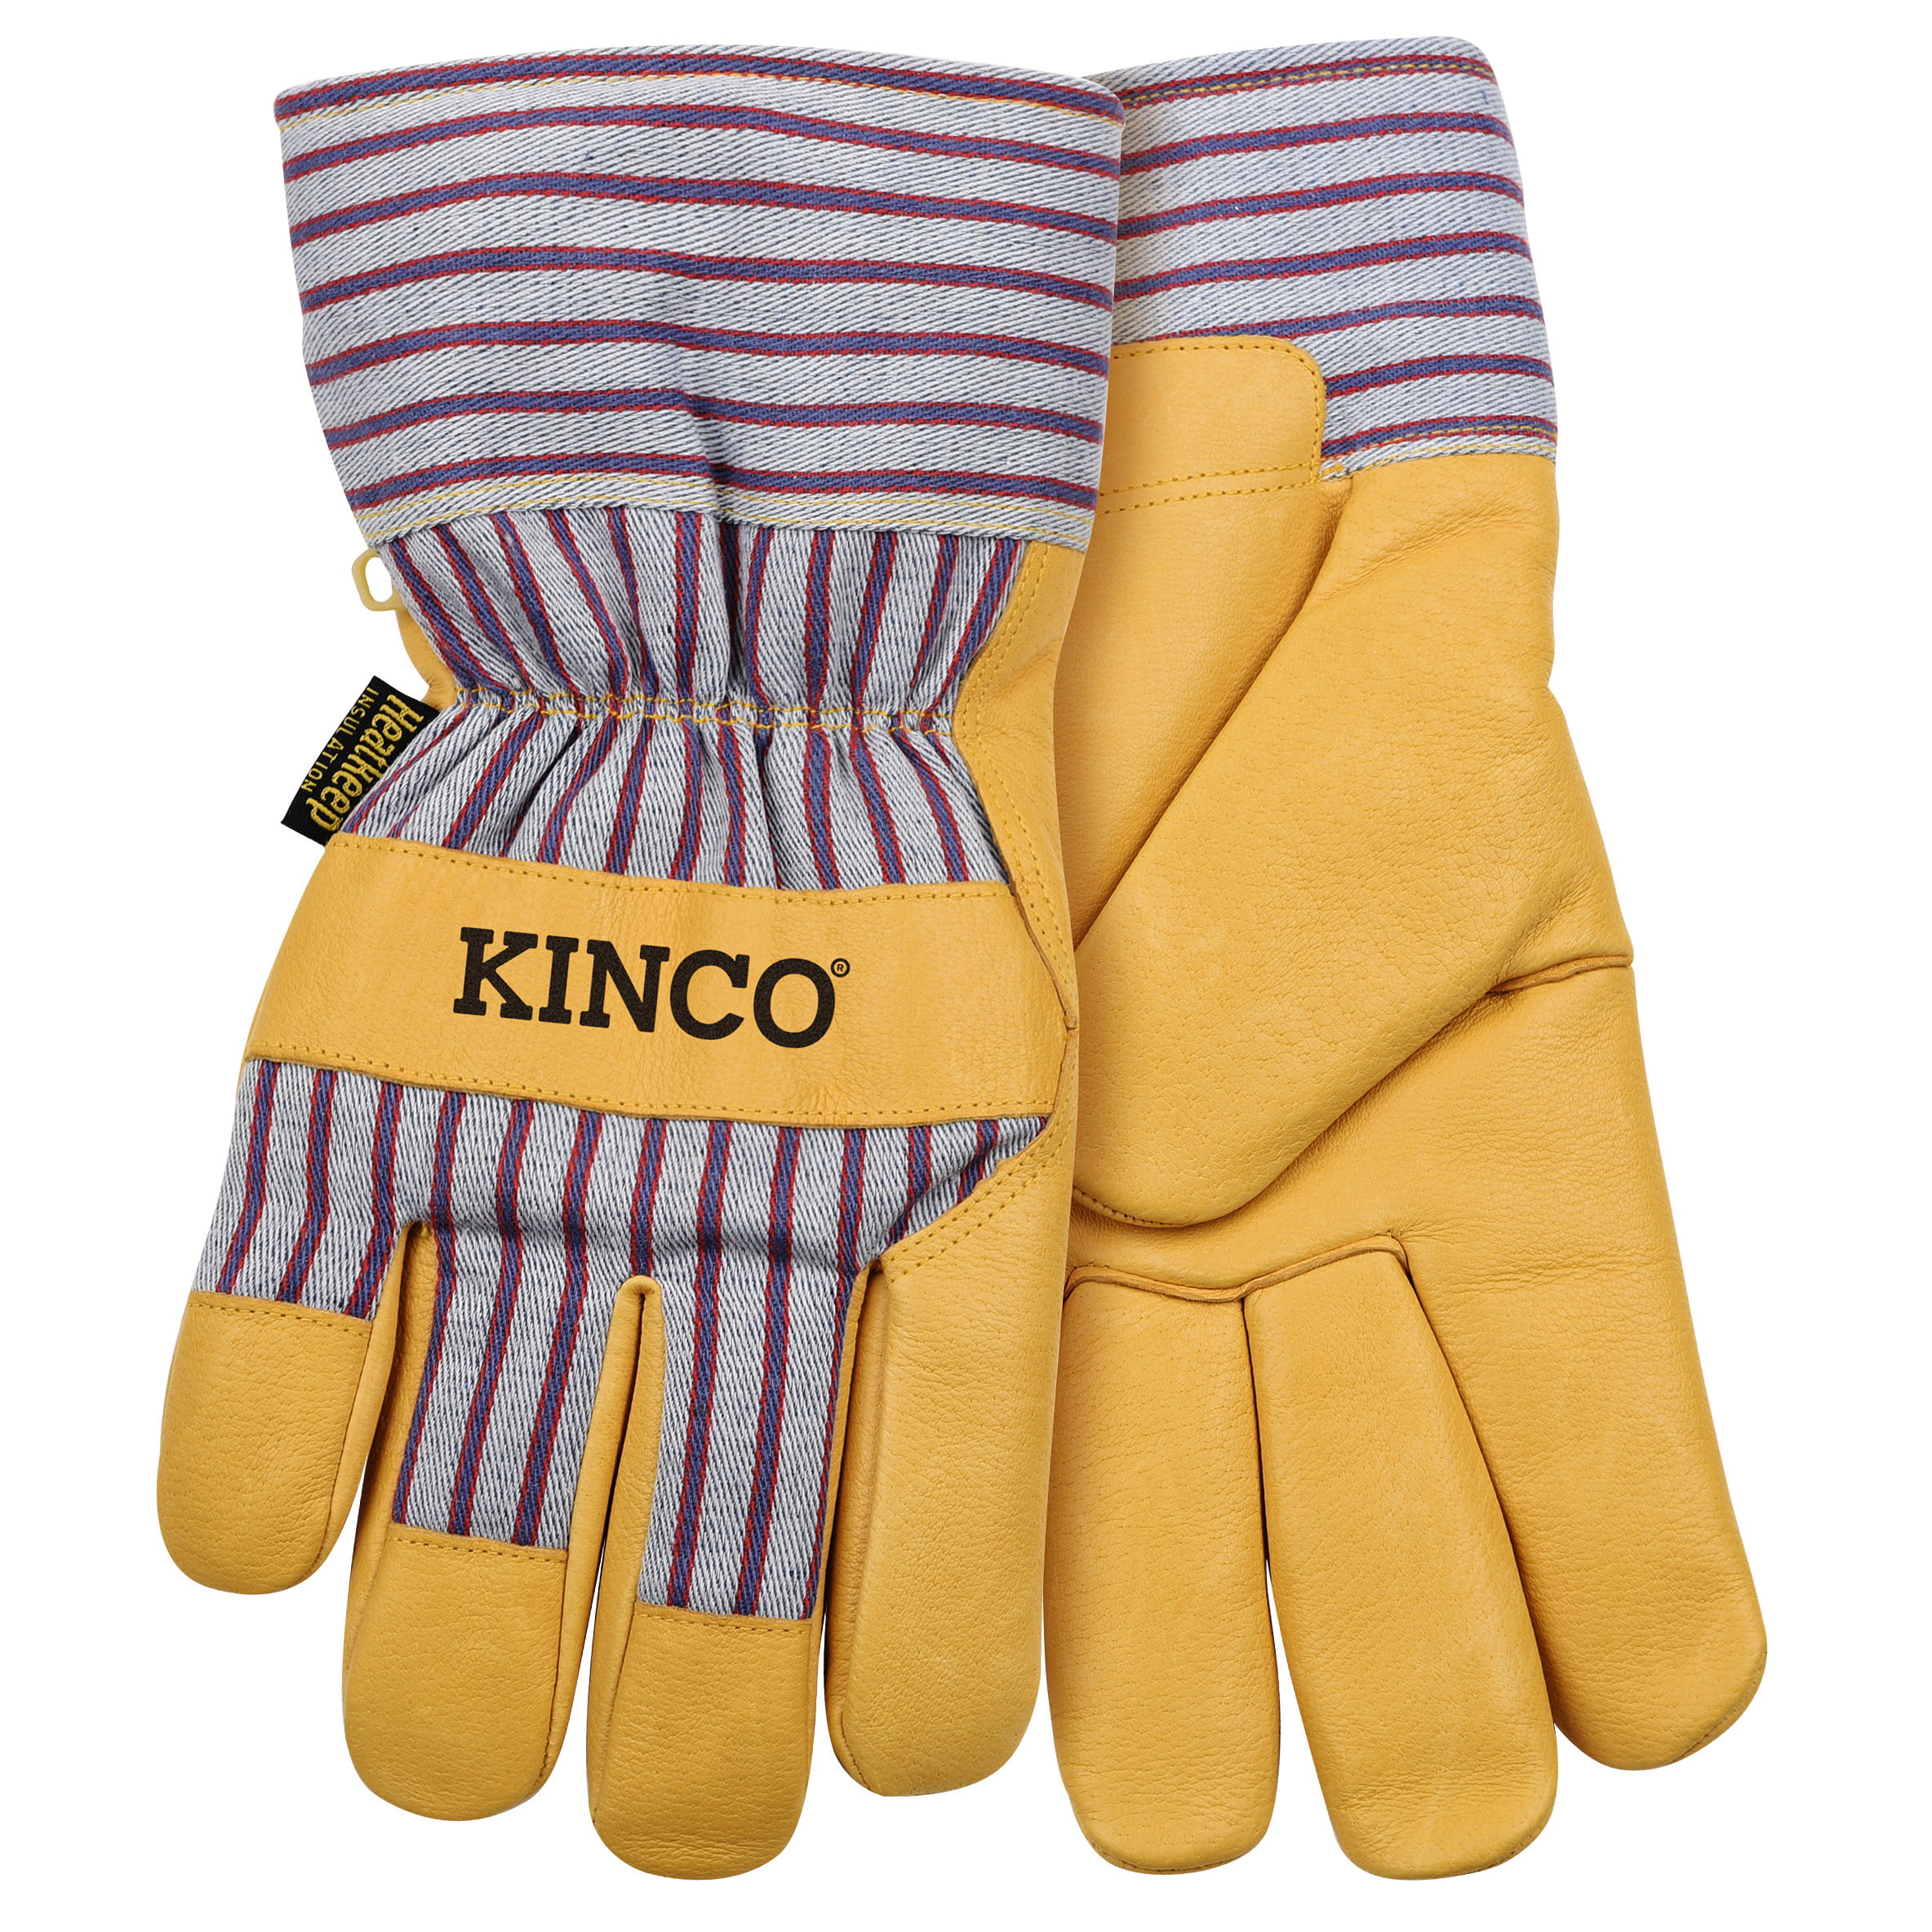 Large Kinco 350HKP-L HYDROFLECTOR Lined Water-Resistant Cowhide Gloves for Men 